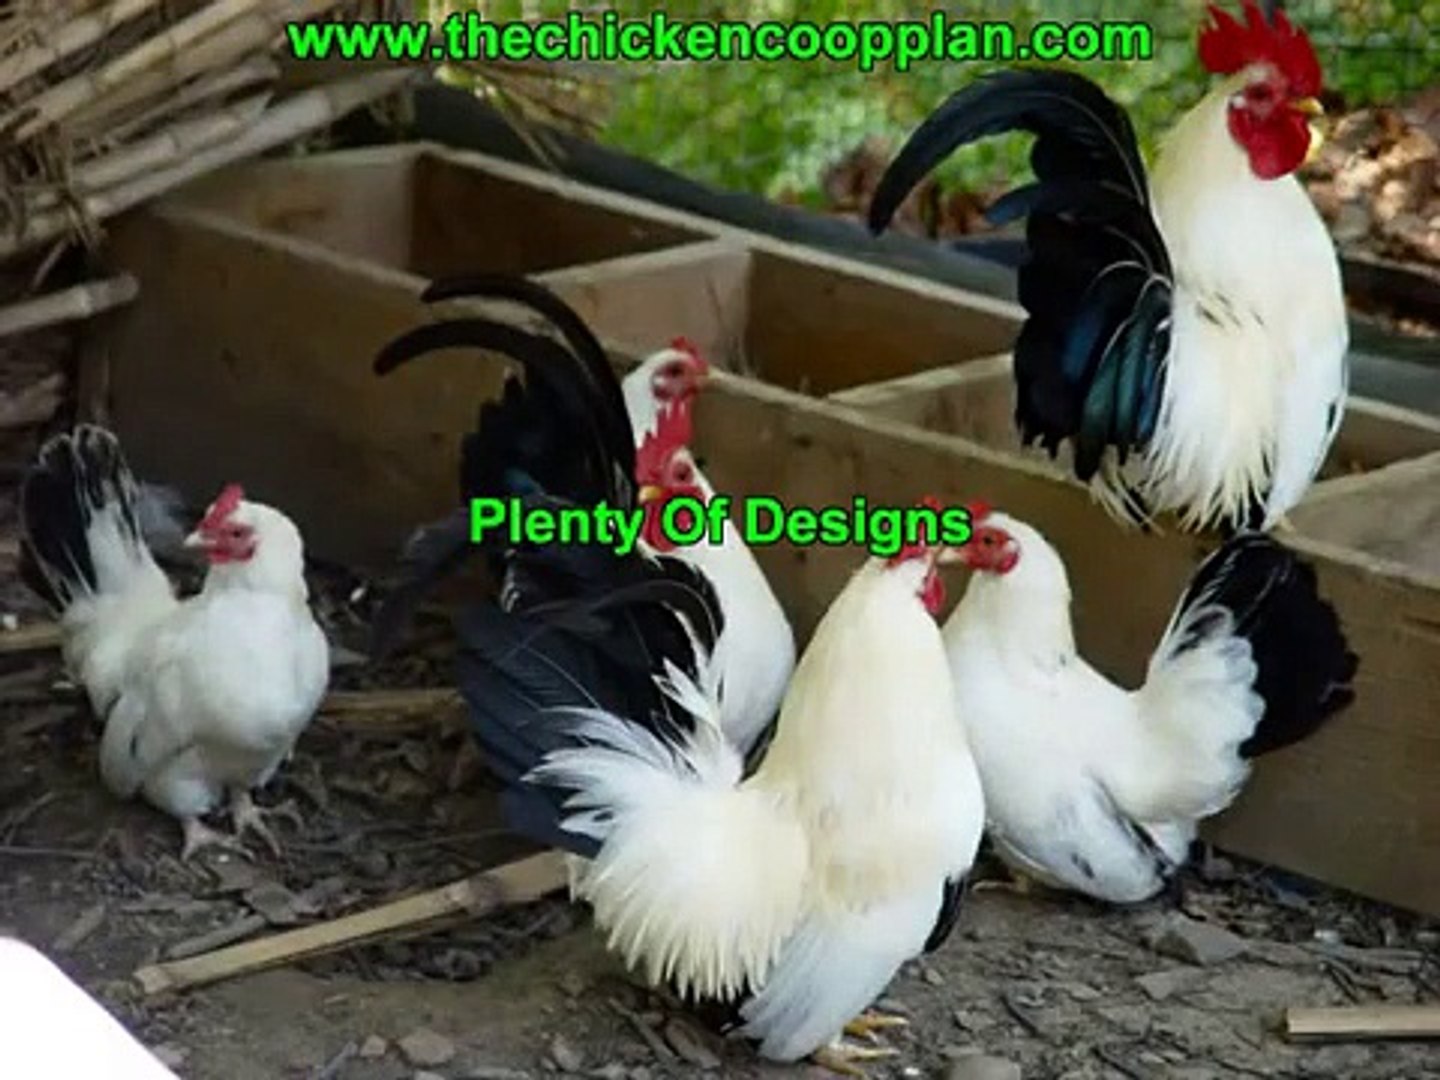 Latest News On Building a Chicken Coop